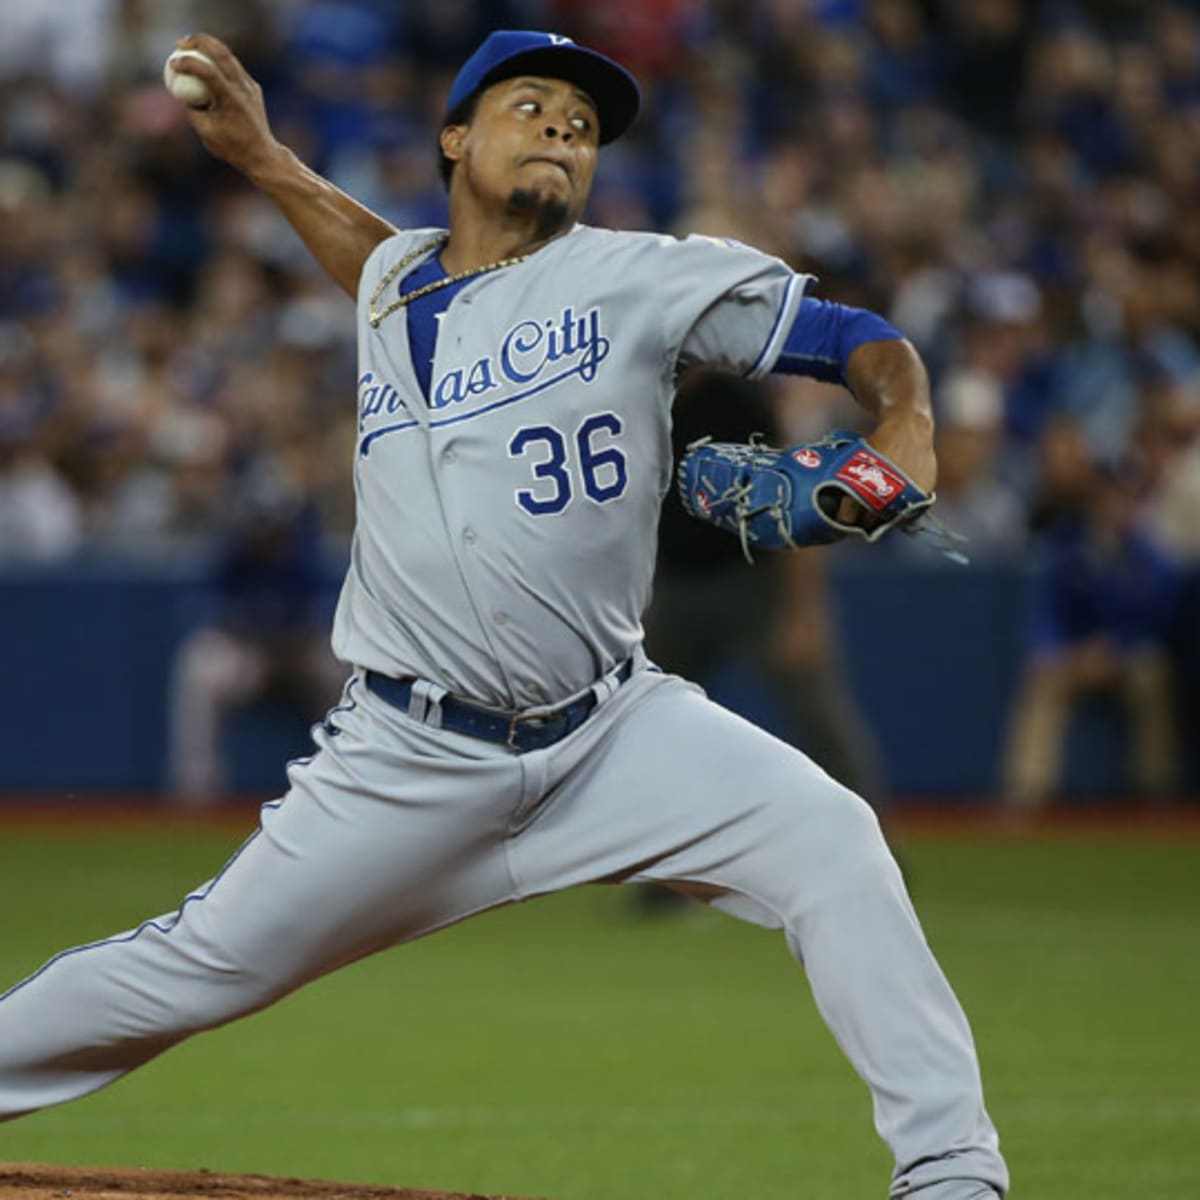 Royals pitcher Edinson Volquez loses father before taking mound